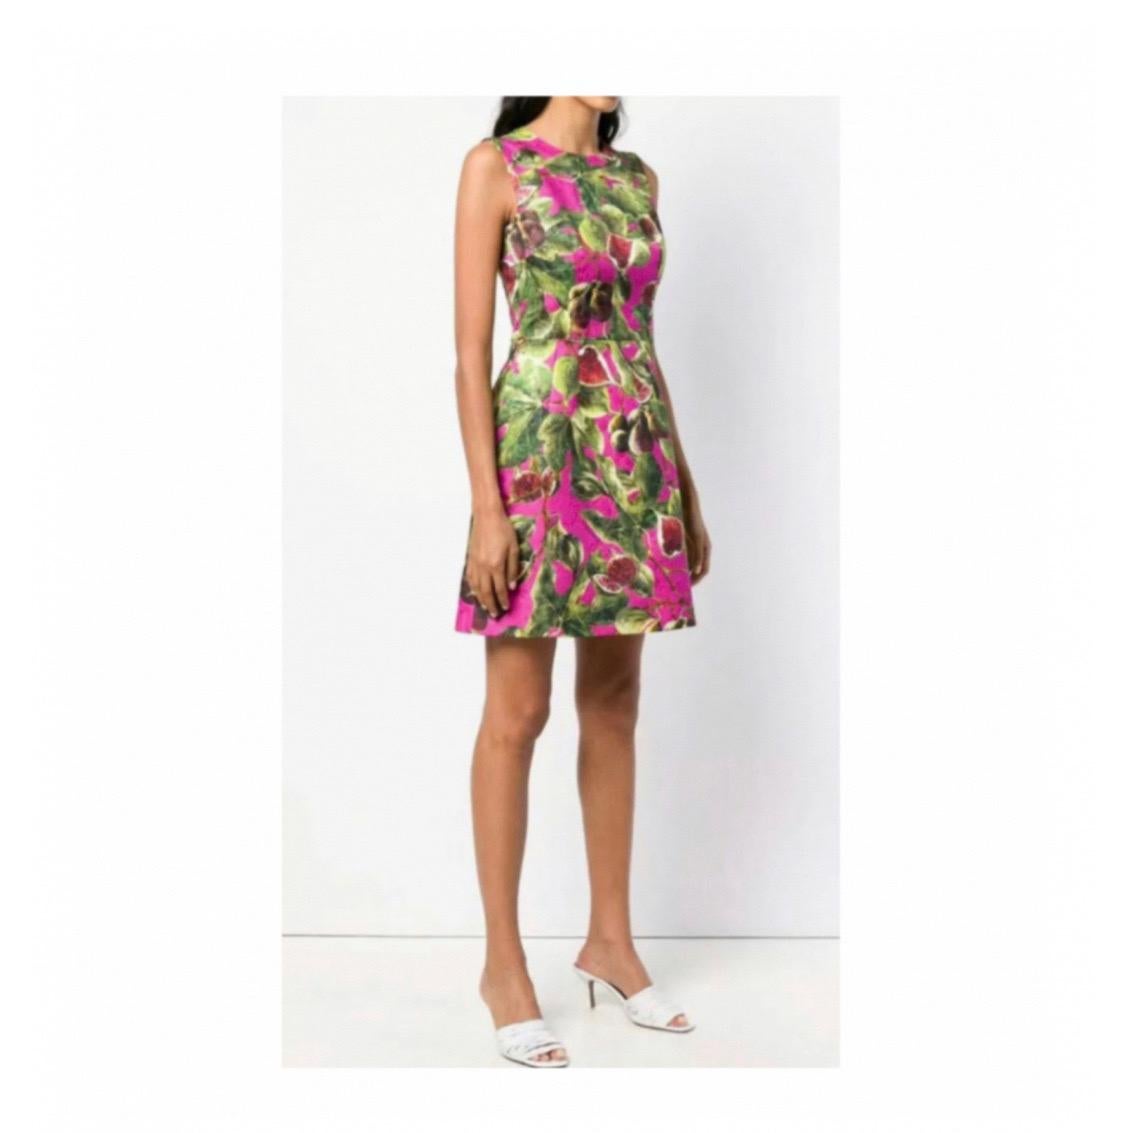 Brown Dolce & Gabbana brocade Figs
Printed mid length dress For Sale